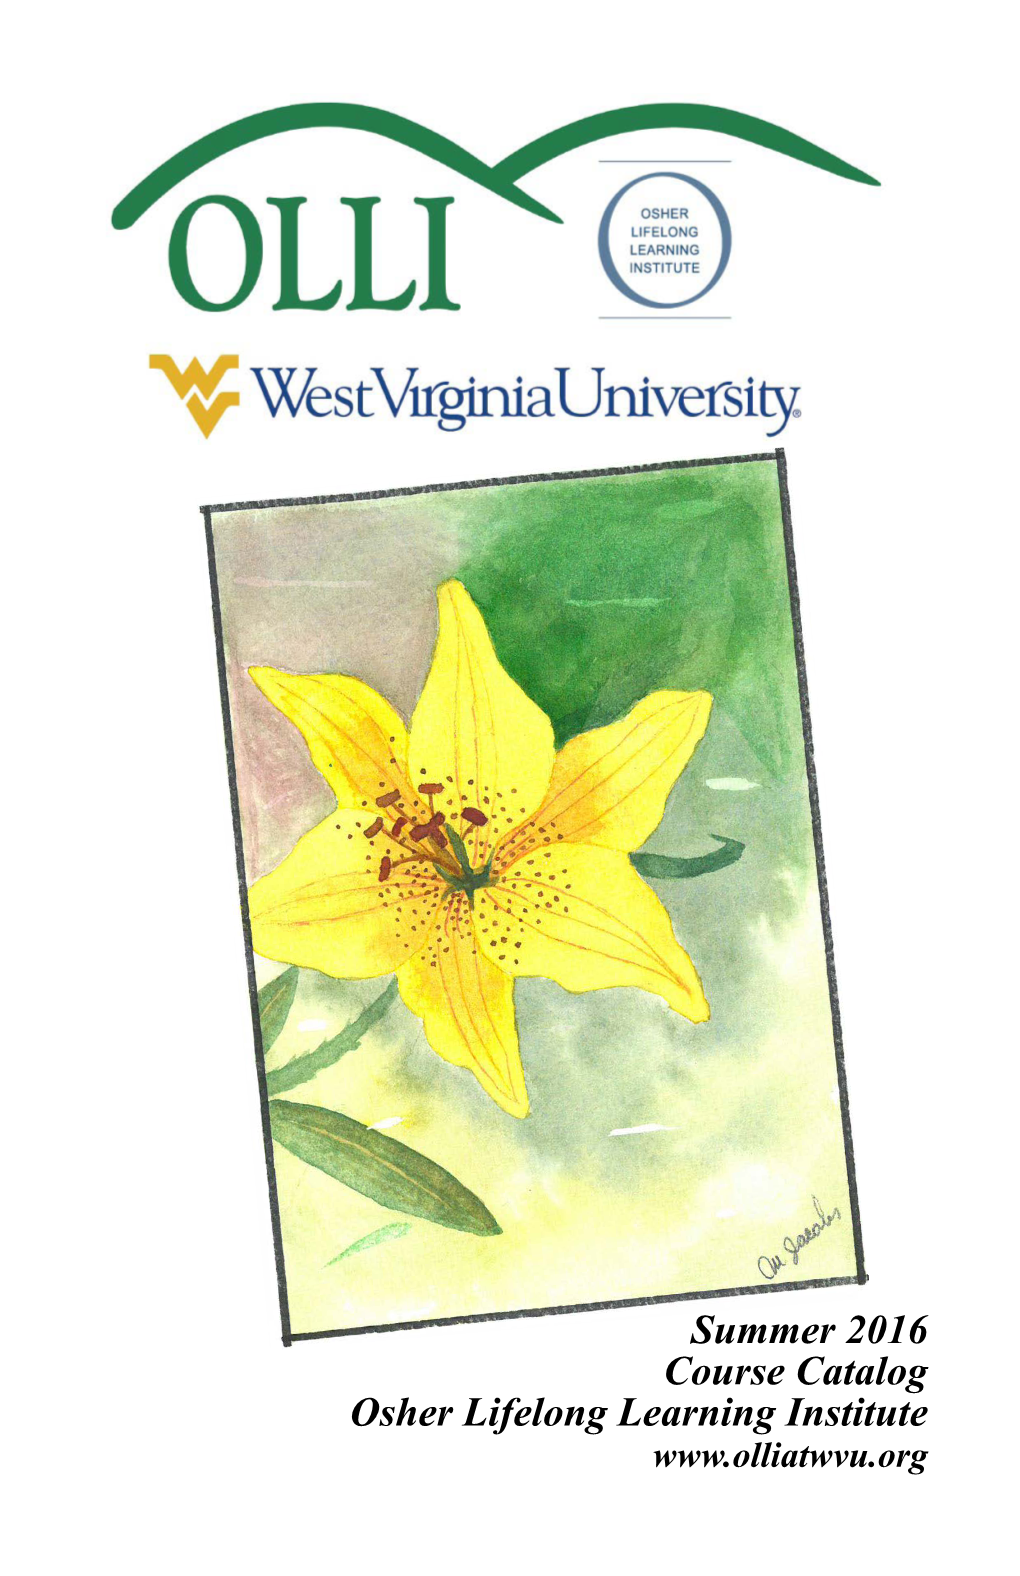 Summer 2016 Course Catalog Osher Lifelong Learning Institute OLLI at WVU